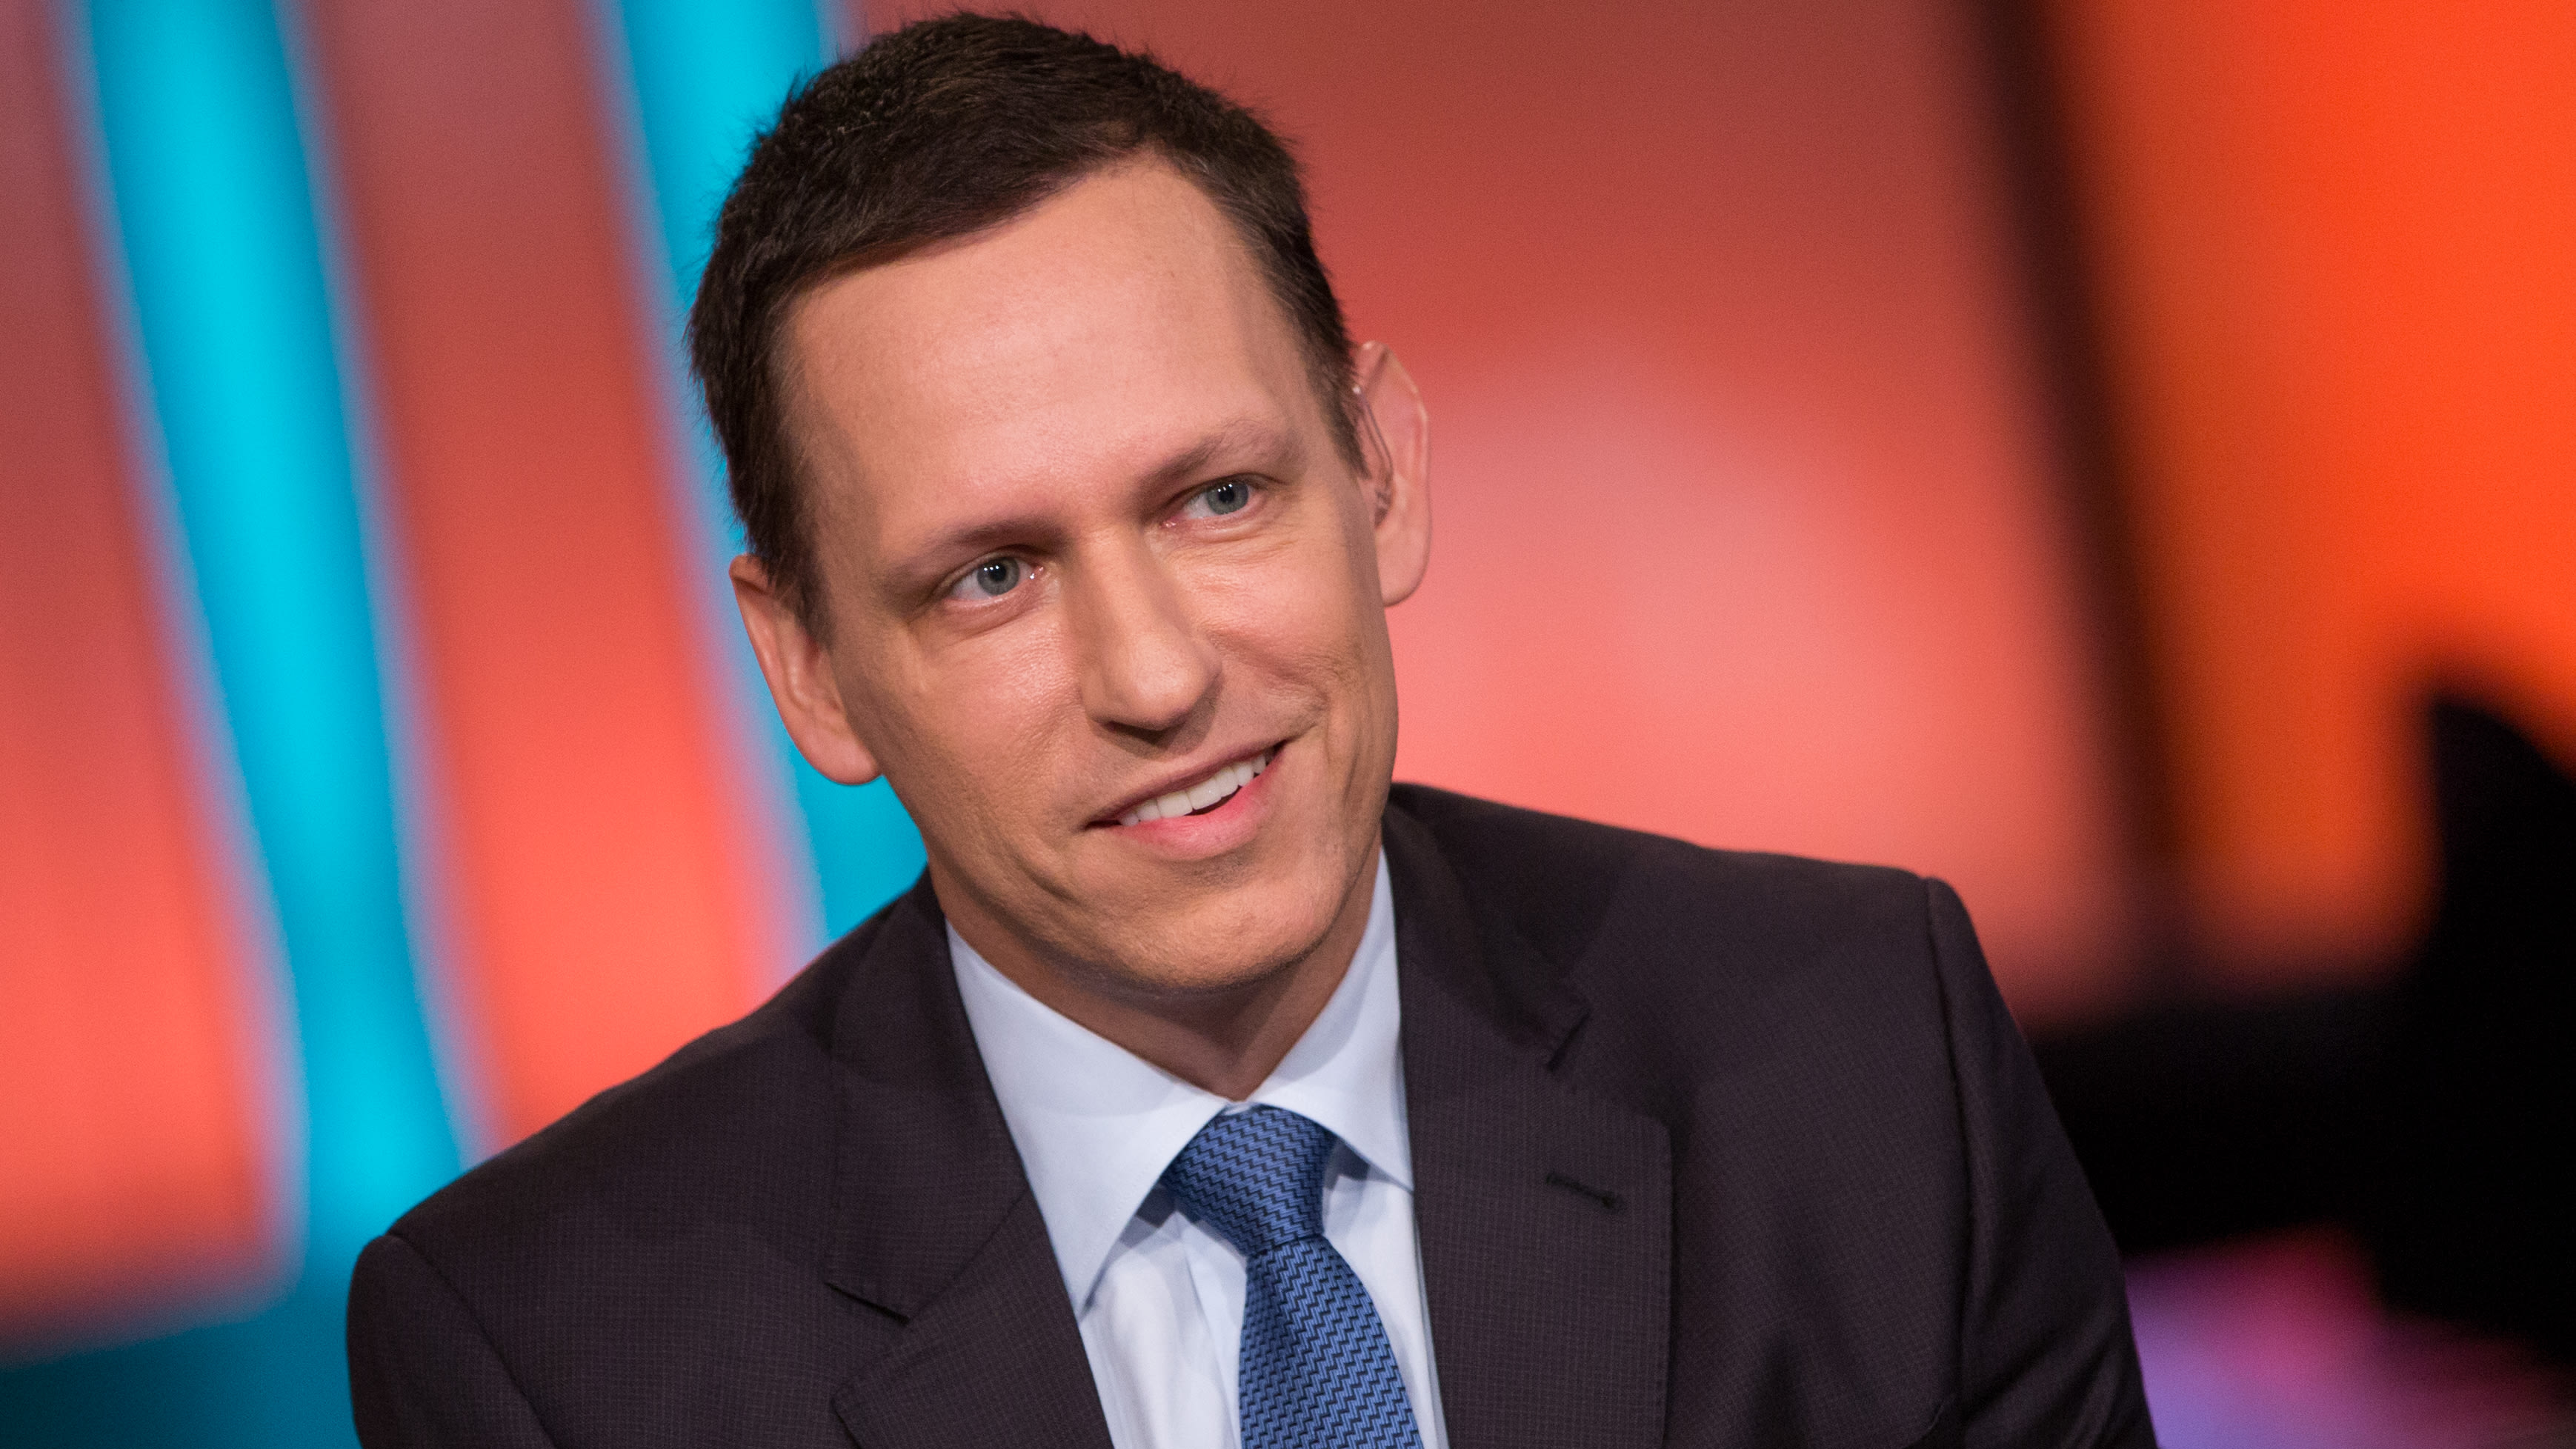 Peter Thiel says Elon Musk is a ‘negative role model’ because he’s too ...